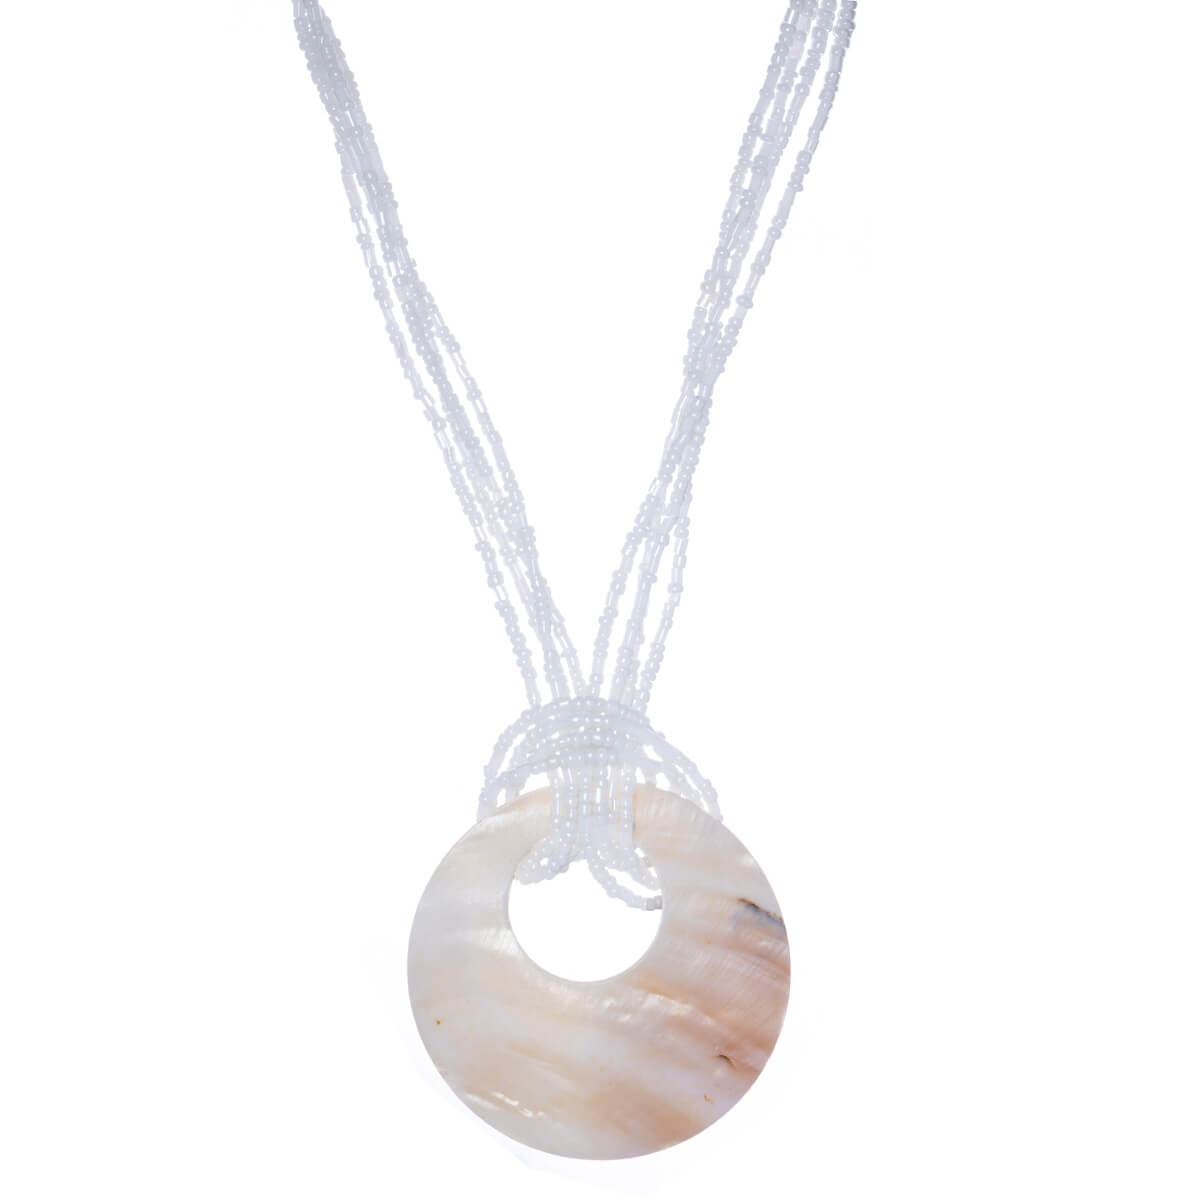 Mussel necklace in pearl strip 50cm